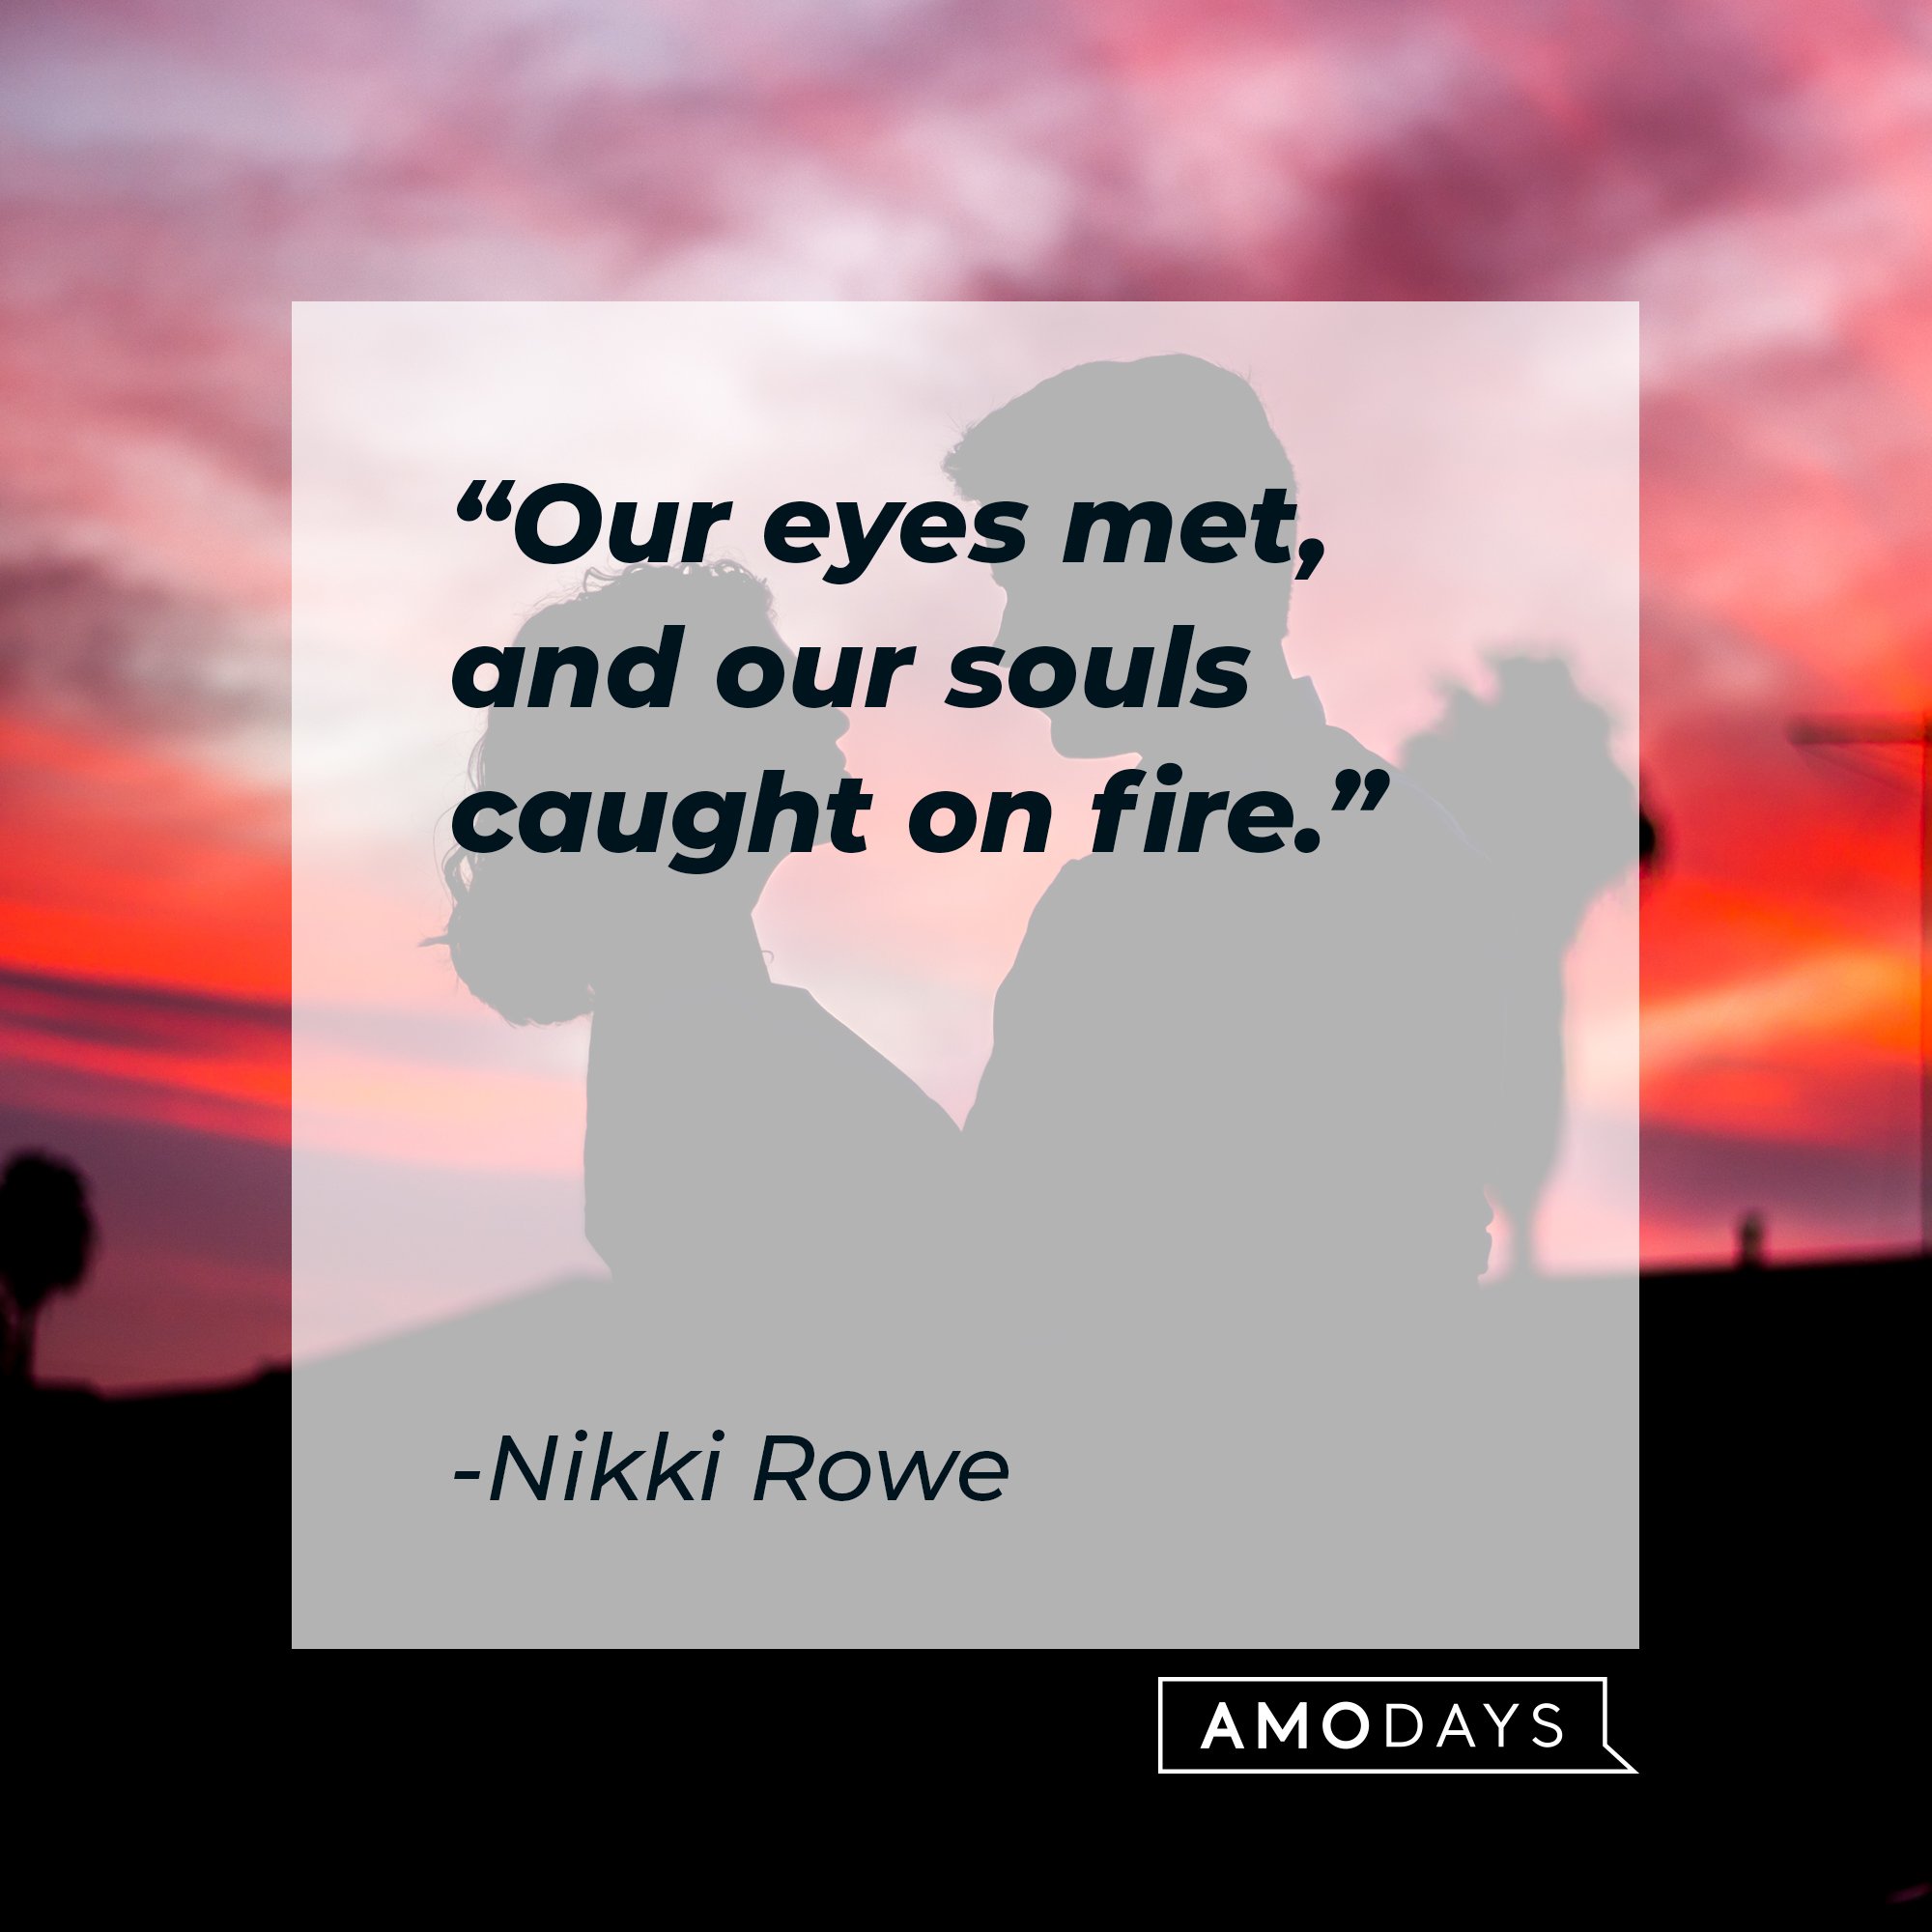 Nikki Rowes quote: "Our eyes met, and our souls caught on fire." | Image: AmoDays 